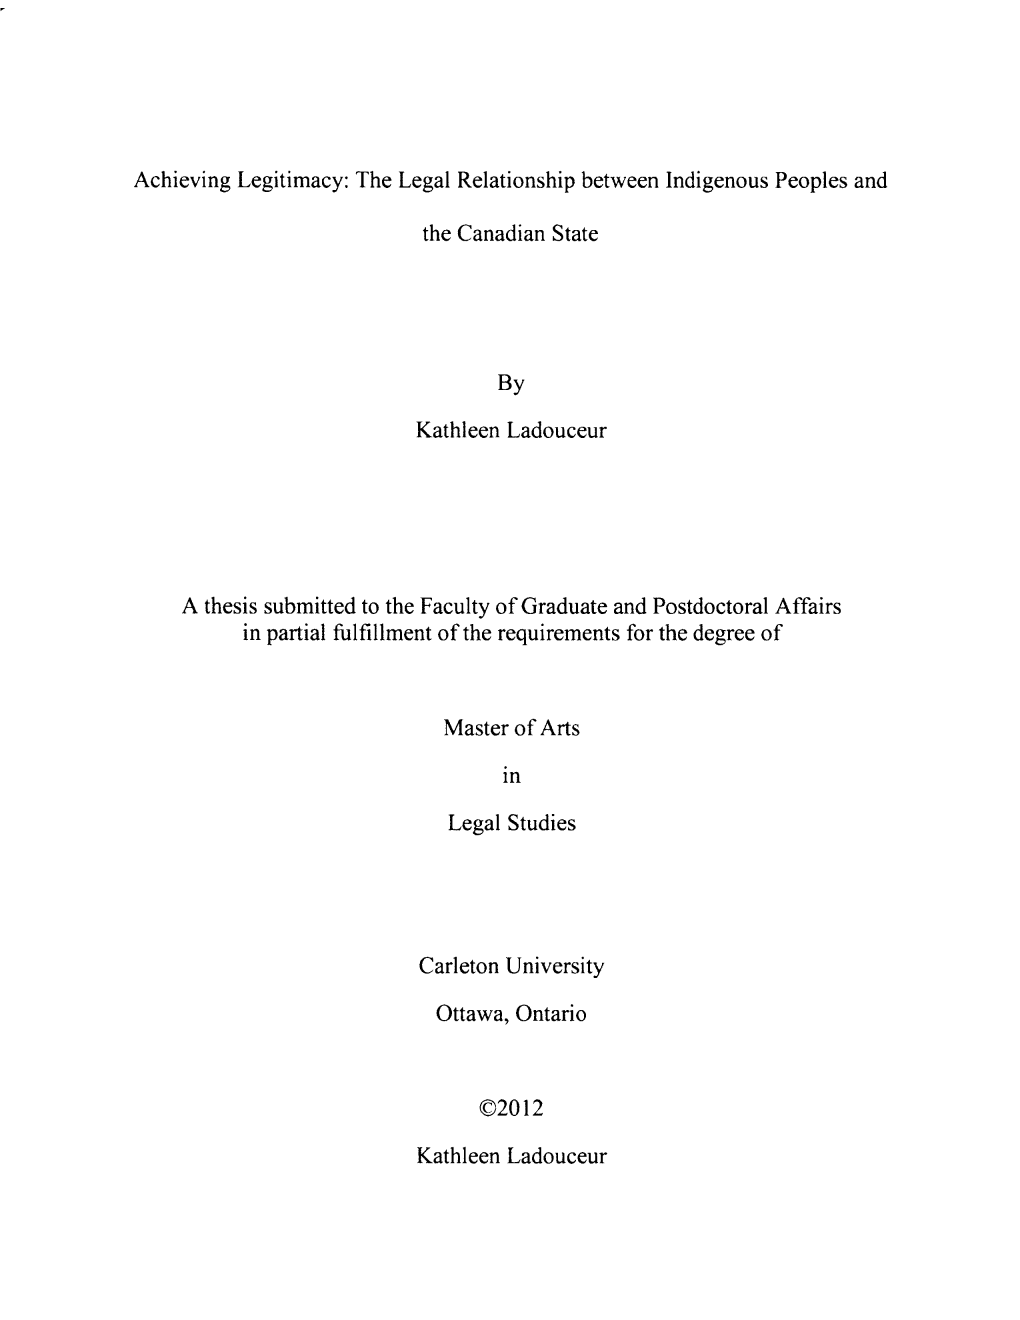 Achieving Legitimacy: the Legal Relationship Between Indigenous Peoples And